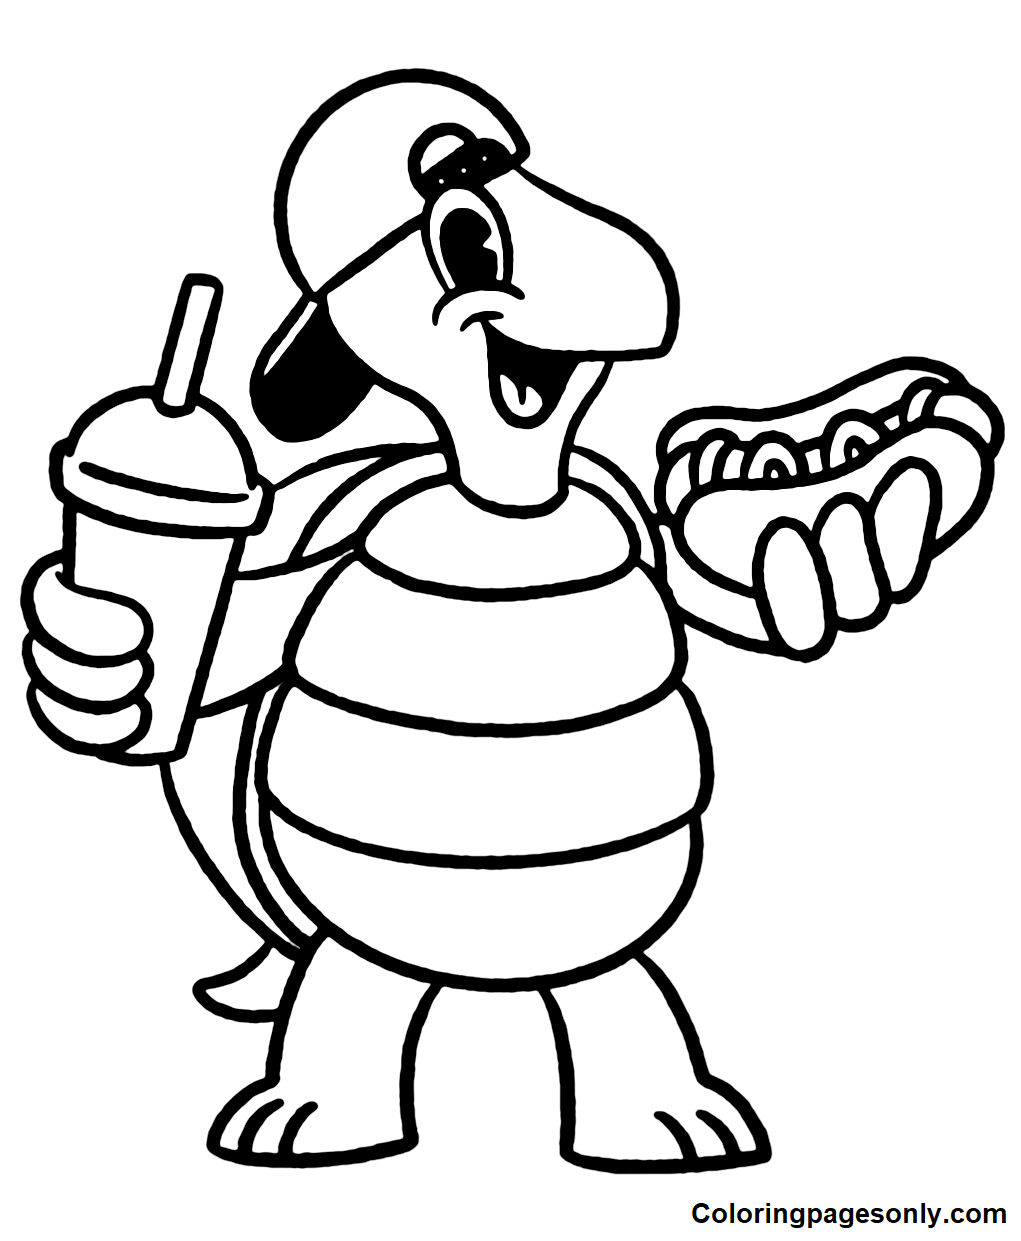 Turtle with Hot Dog Sandwich Coloring Pages